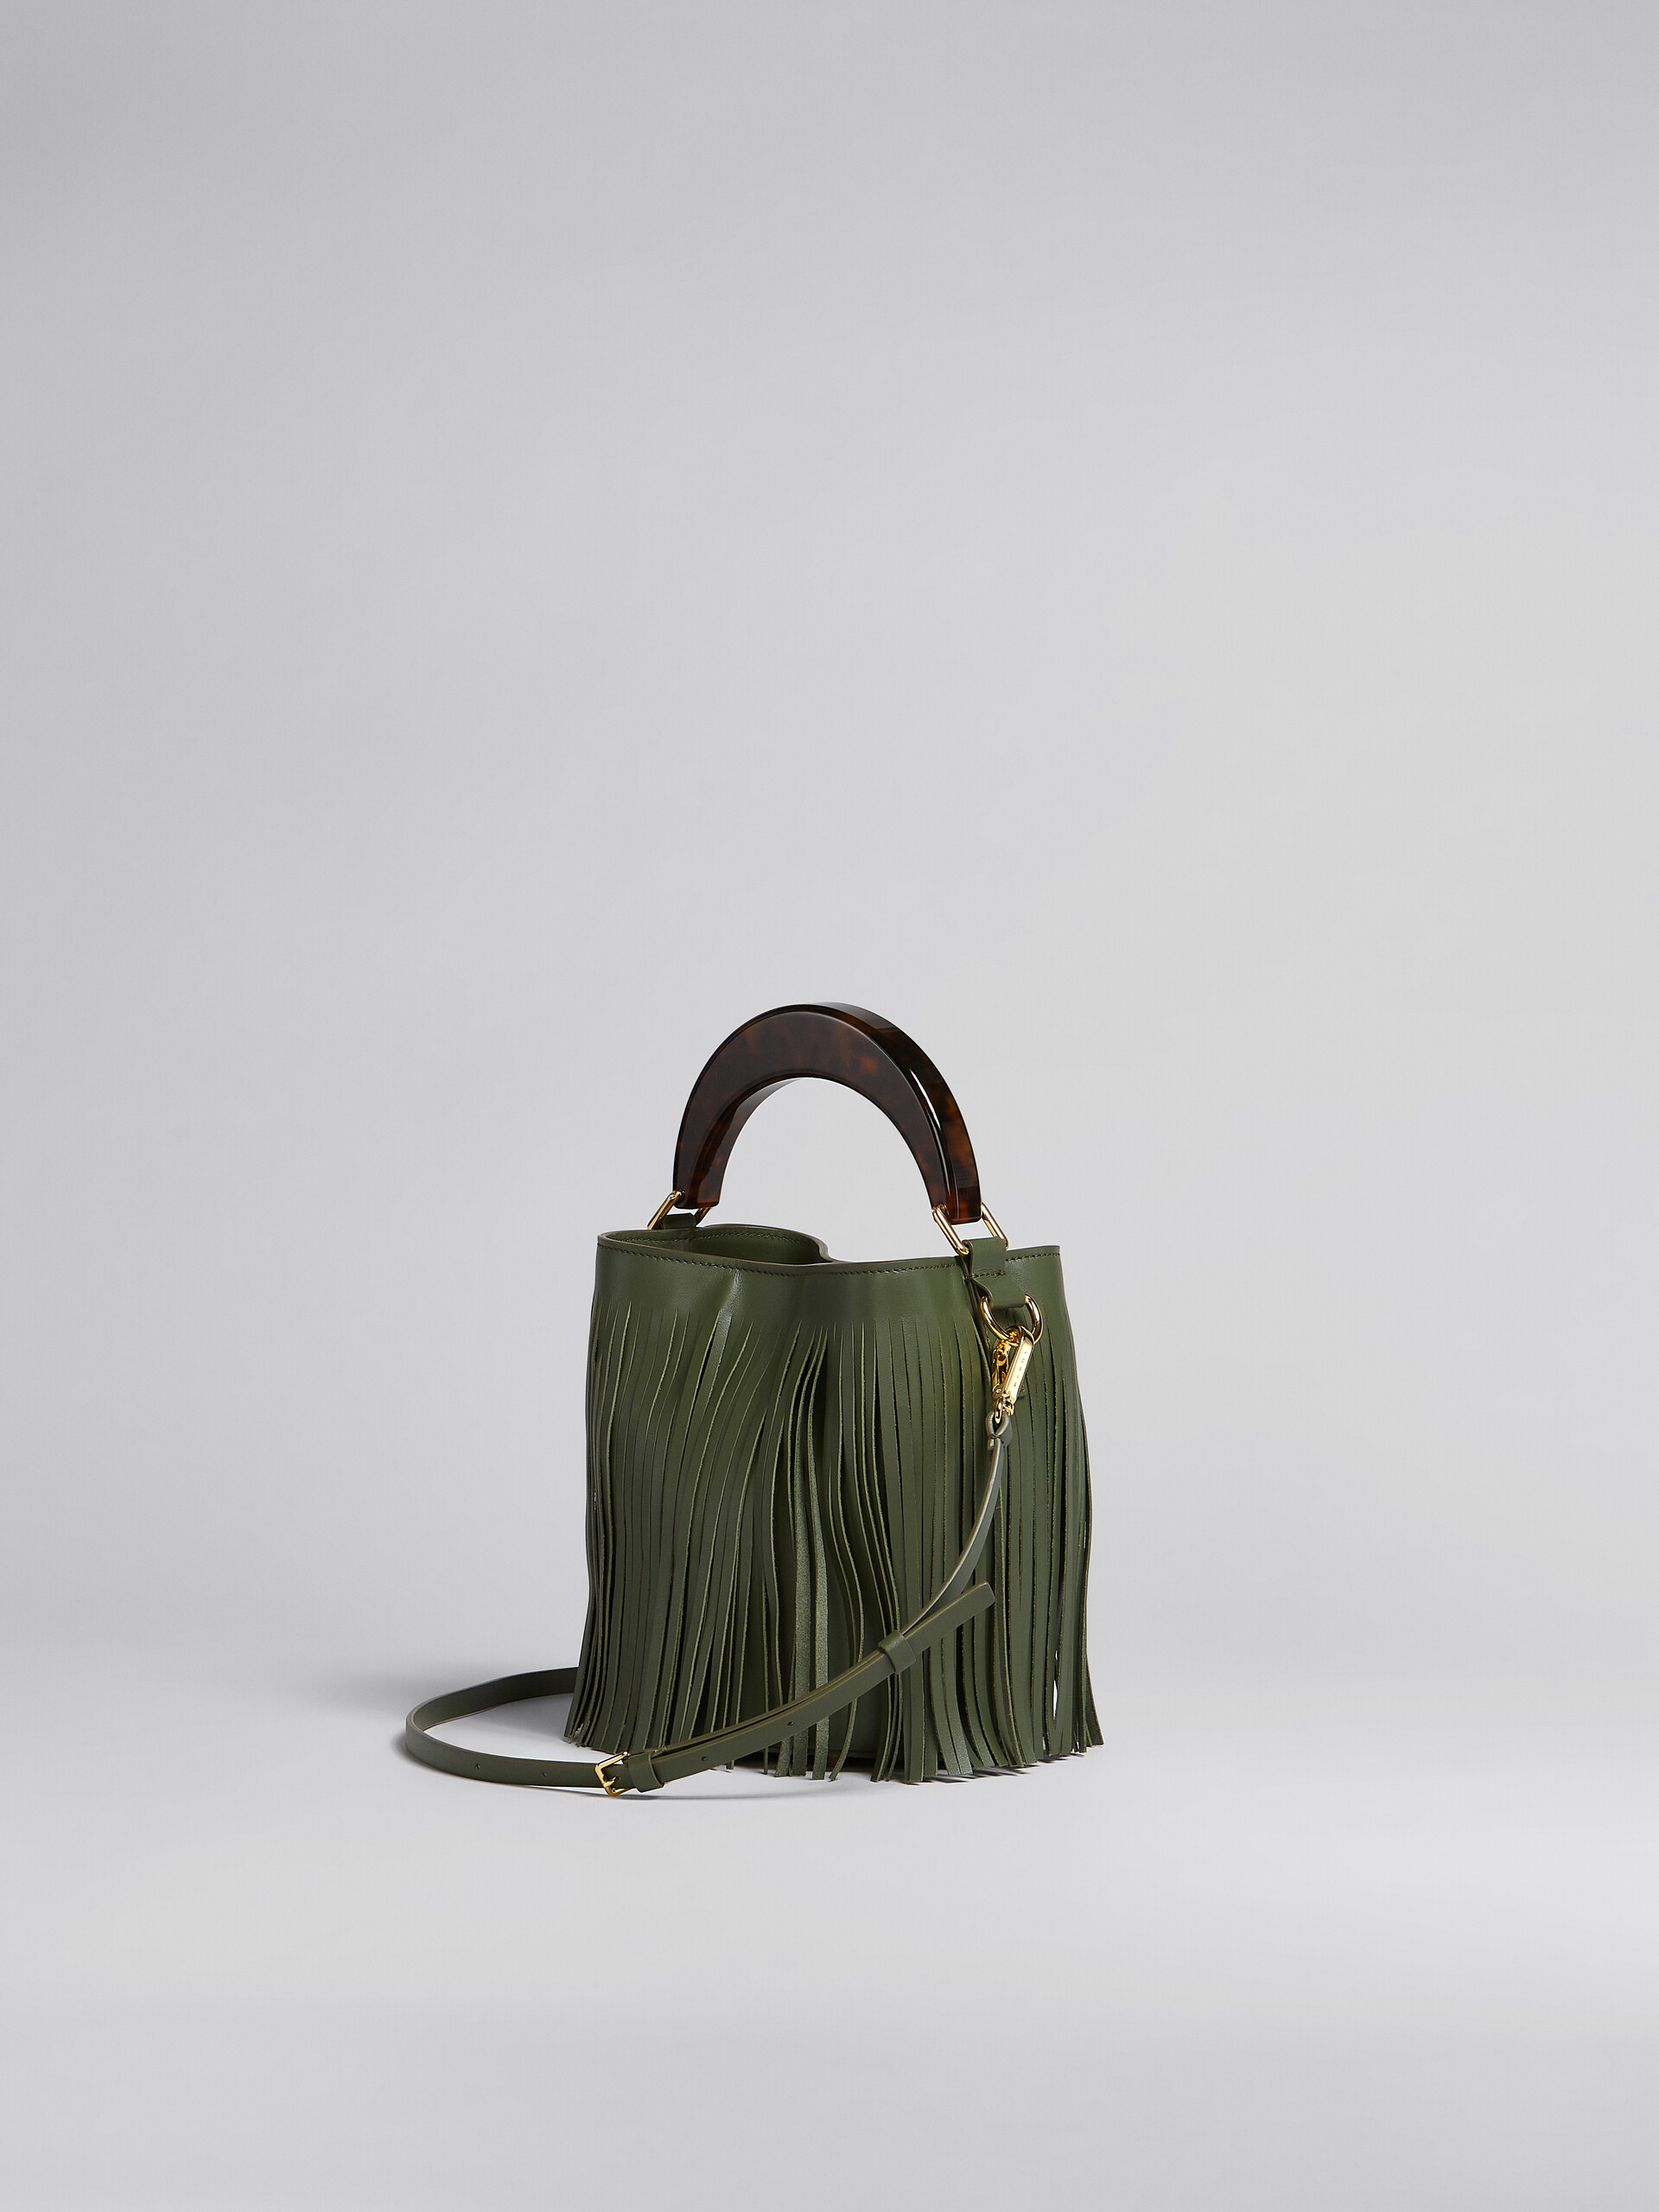 Venice Small Bucket in green leather with fringes - Shoulder Bag - Image 3